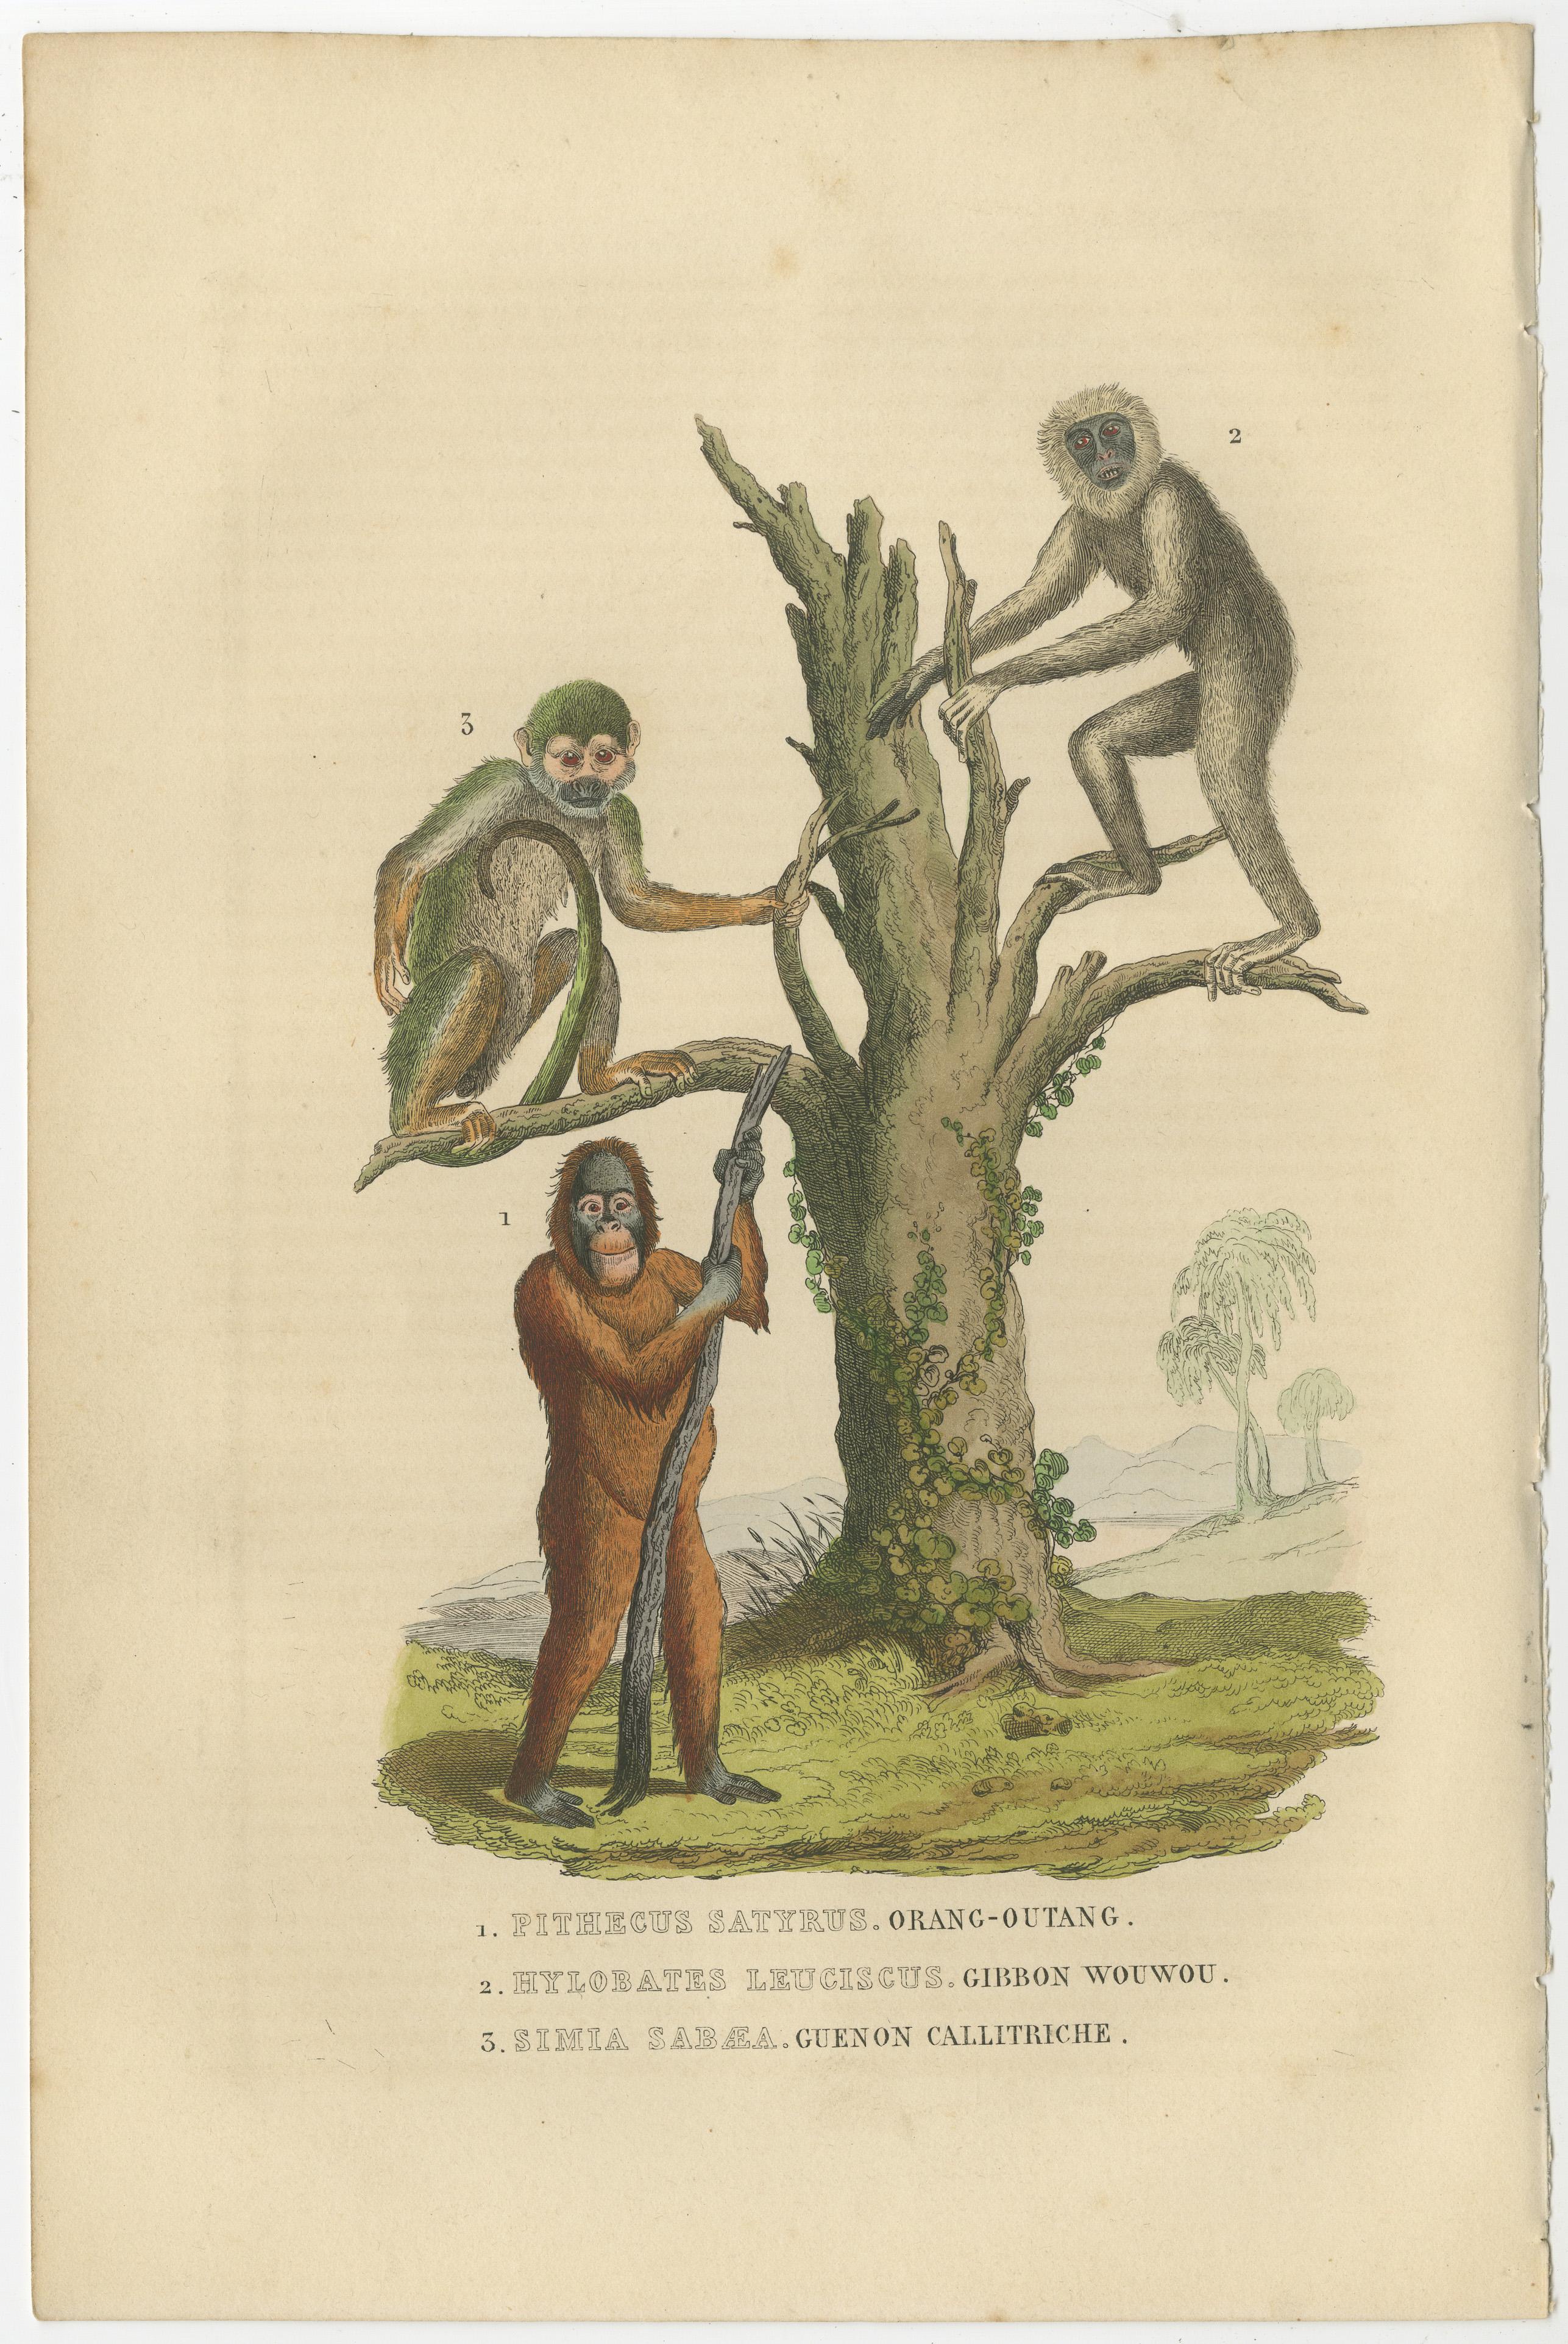 Original antique hand-colored print of three monkeys. Very decorative.

Encounter the intriguing world of primates through this collection featuring three remarkable species captured in detailed illustrations. 

Firstly, the majestic 'PITHECUS